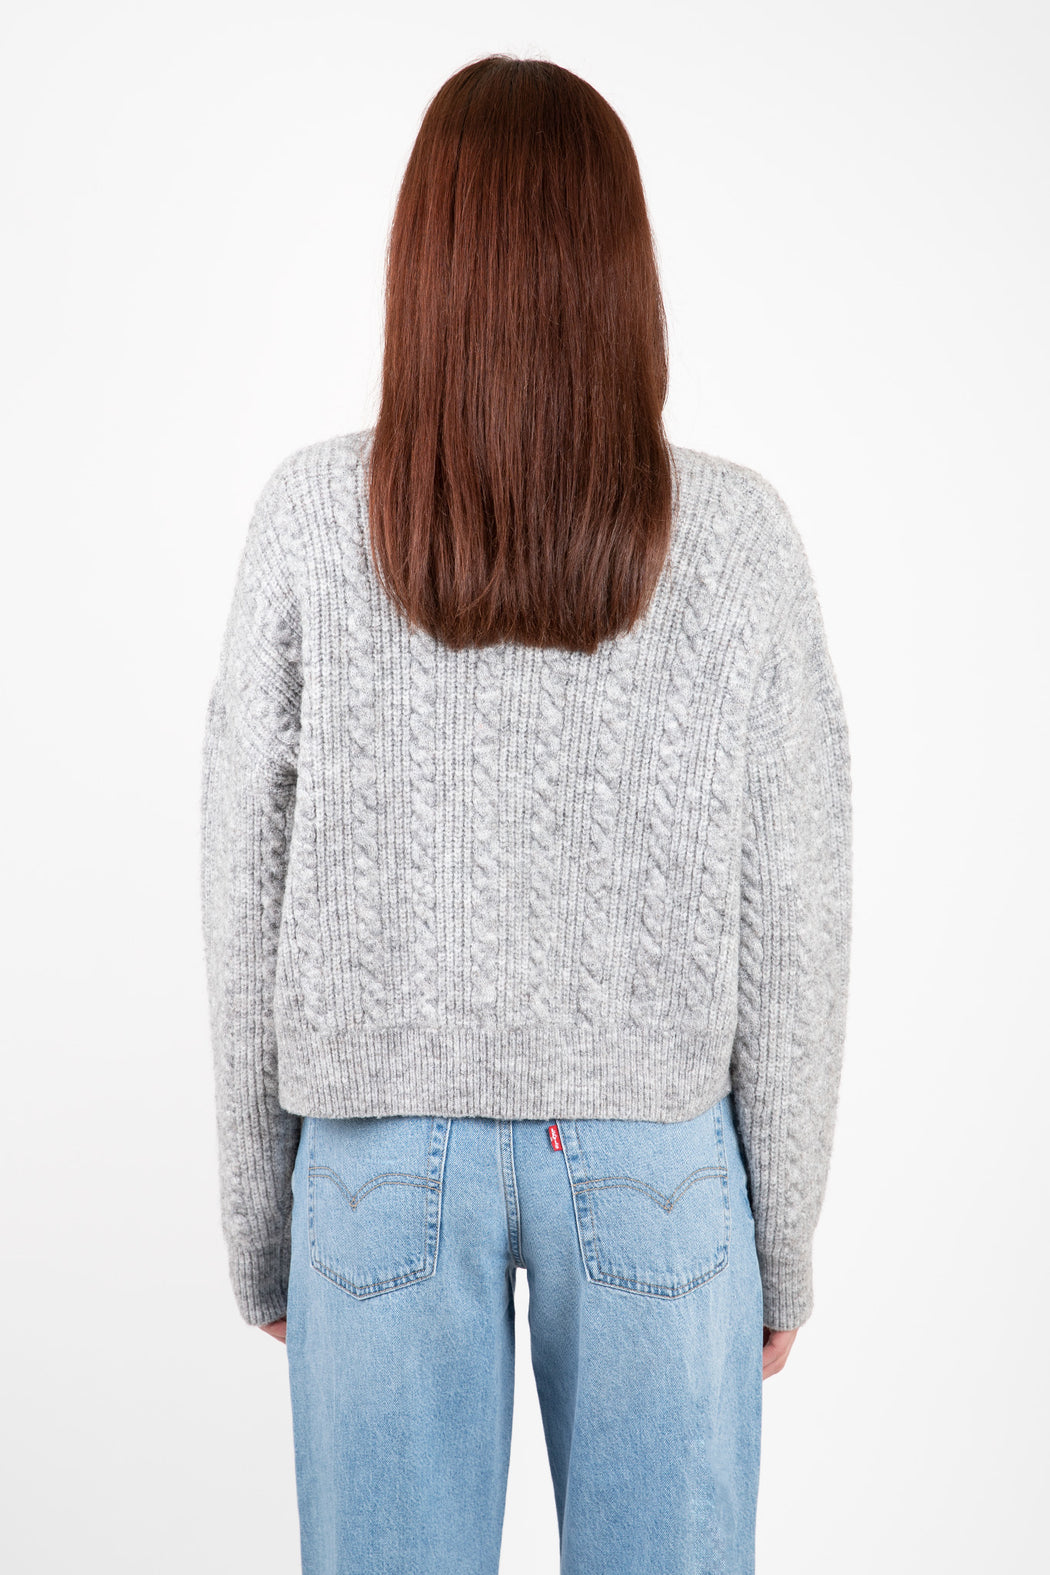 Lyla-Luxe-Addie-Cable-Sweater-Light-Grey